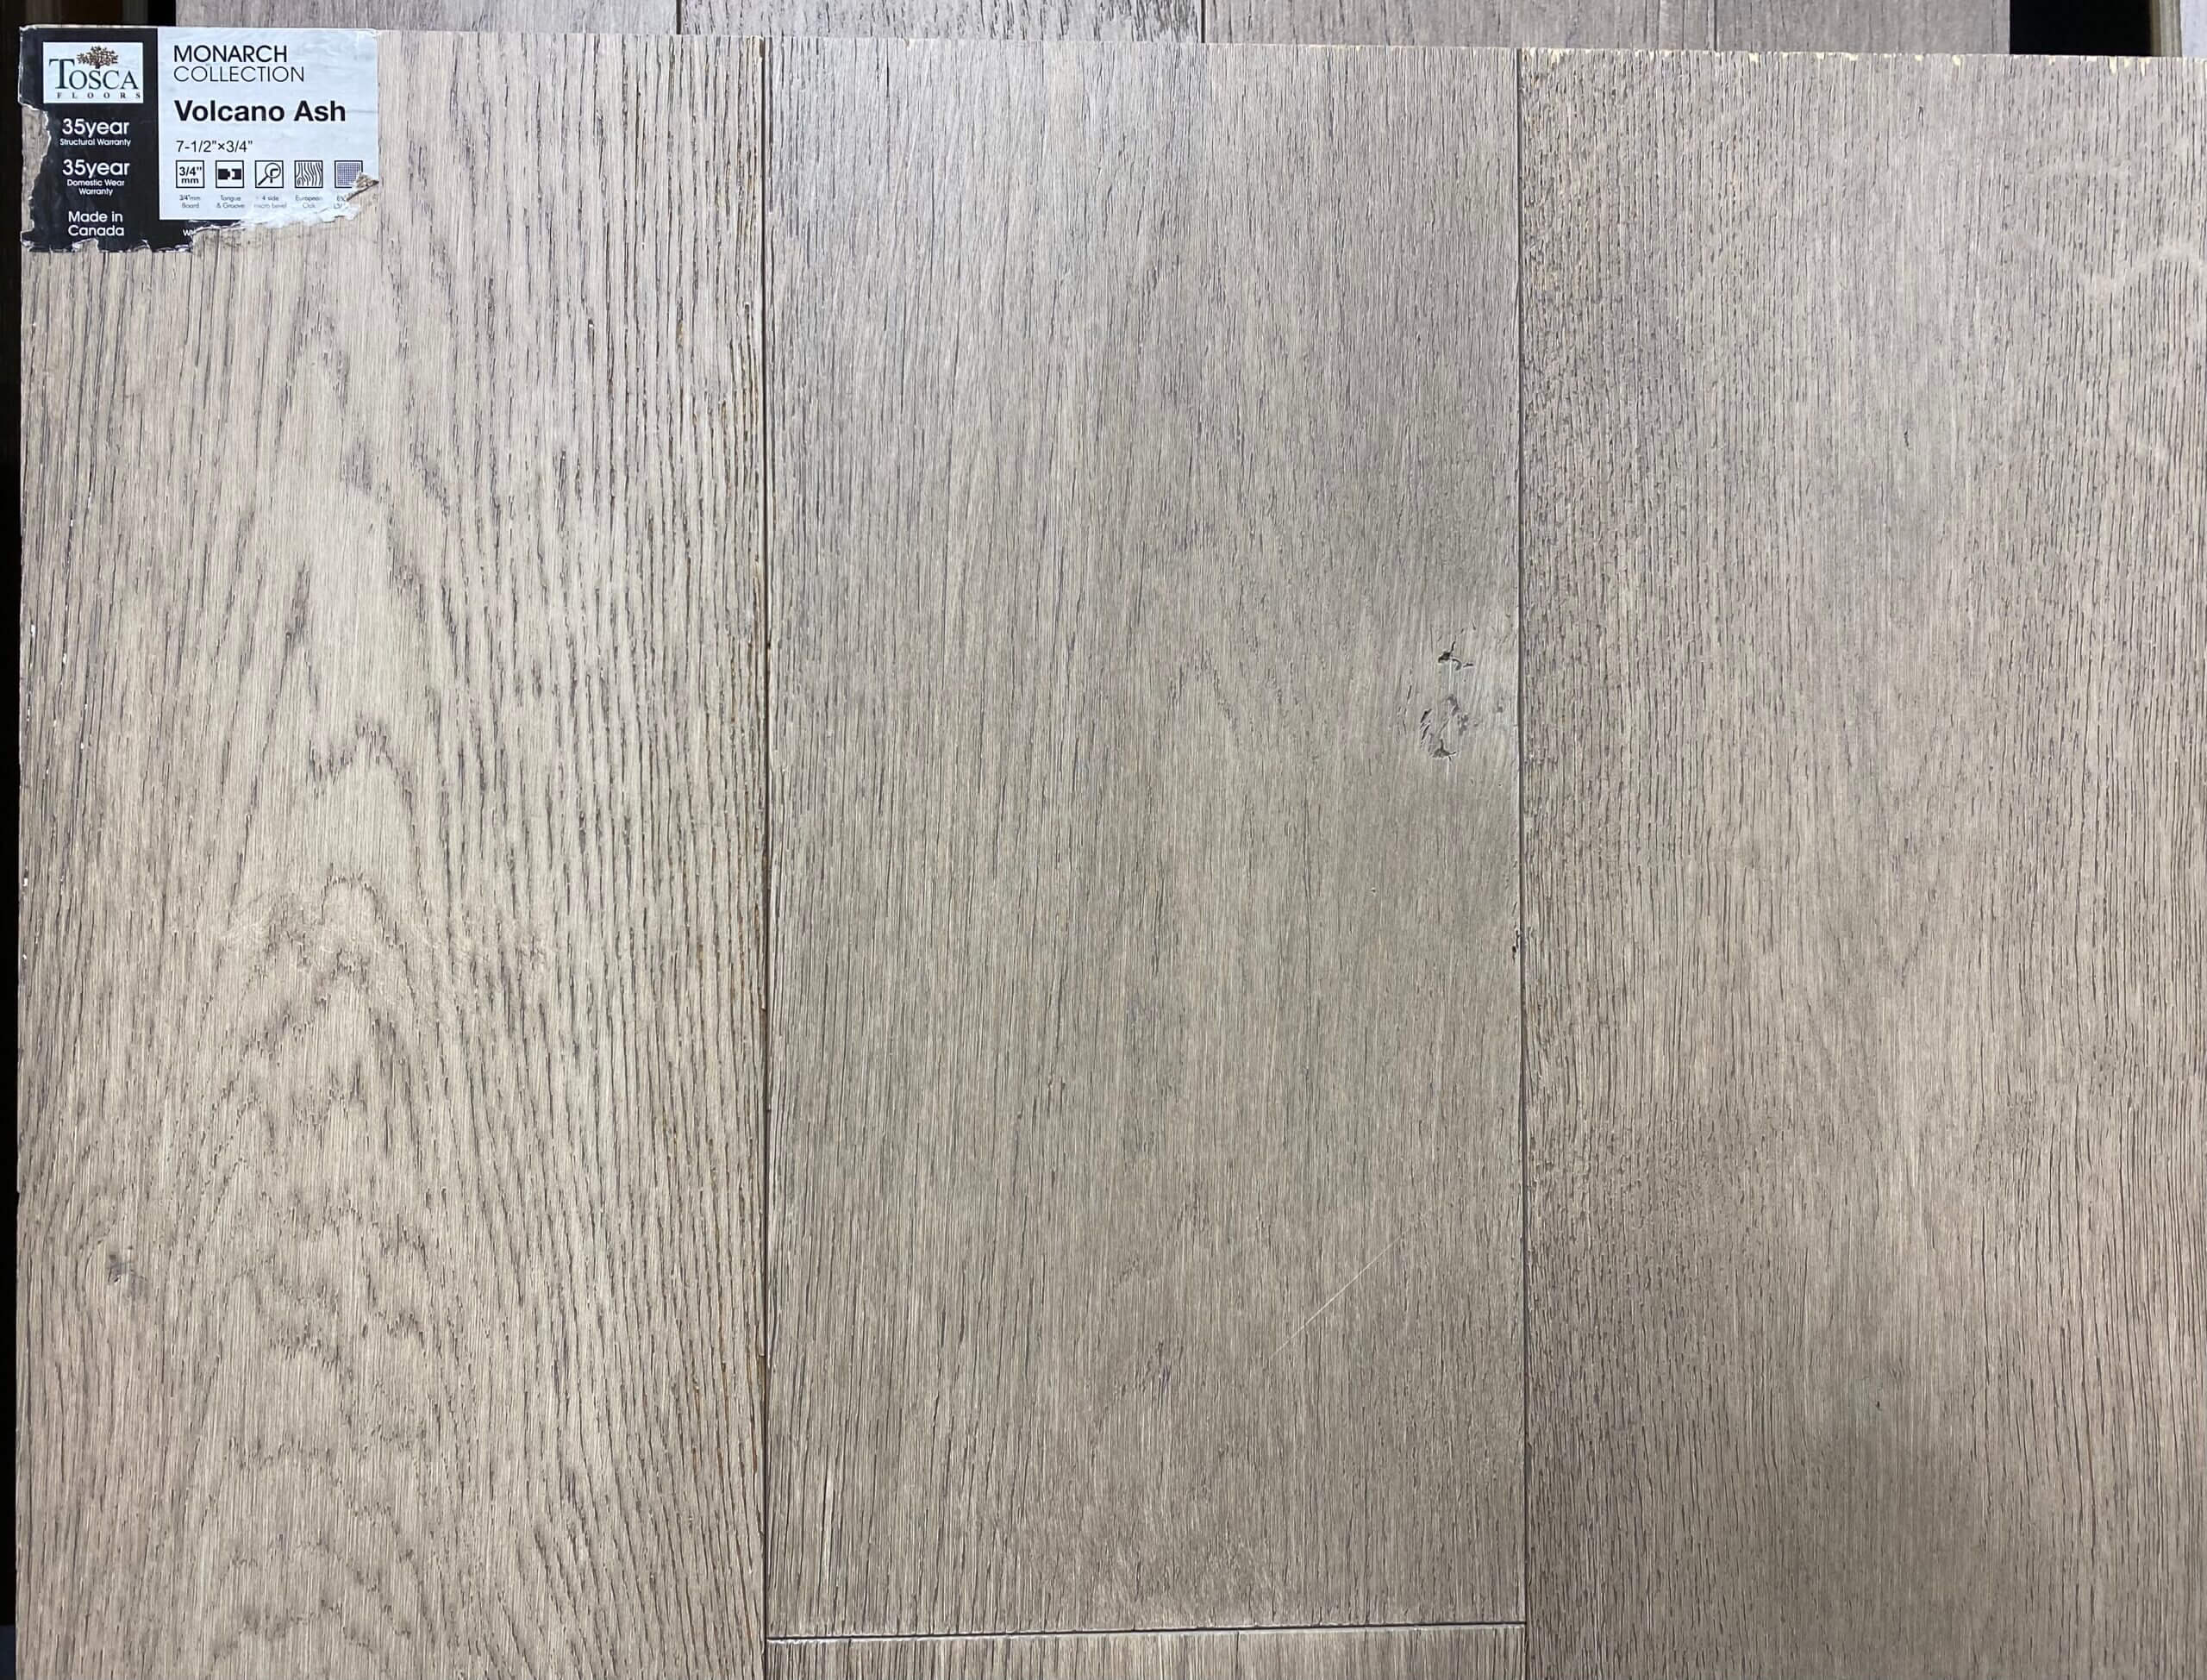 Tosca Engineered Flooring Monarch Collection Volcano Ash 7 -1/2″x 3/4″ mm